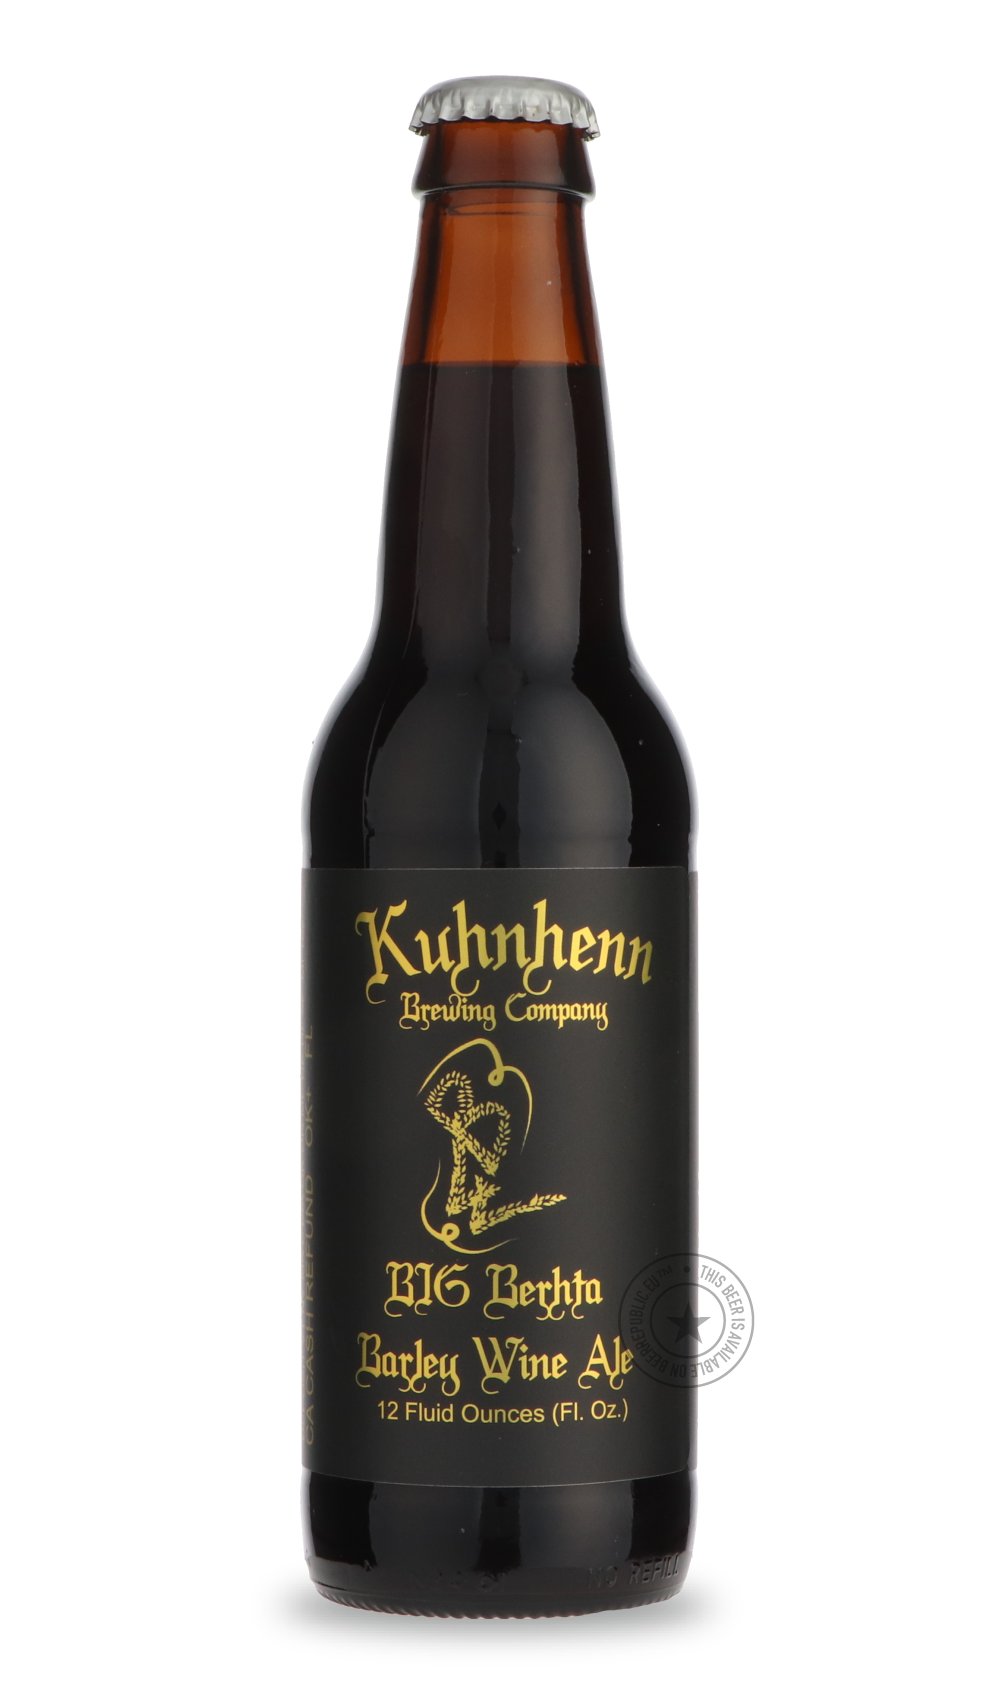 -Kuhnhenn- BIG Berhta Barley Wine-Brown & Dark- Only @ Beer Republic - The best online beer store for American & Canadian craft beer - Buy beer online from the USA and Canada - Bier online kopen - Amerikaans bier kopen - Craft beer store - Craft beer kopen - Amerikanisch bier kaufen - Bier online kaufen - Acheter biere online - IPA - Stout - Porter - New England IPA - Hazy IPA - Imperial Stout - Barrel Aged - Barrel Aged Imperial Stout - Brown - Dark beer - Blond - Blonde - Pilsner - Lager - Wheat - Weizen 